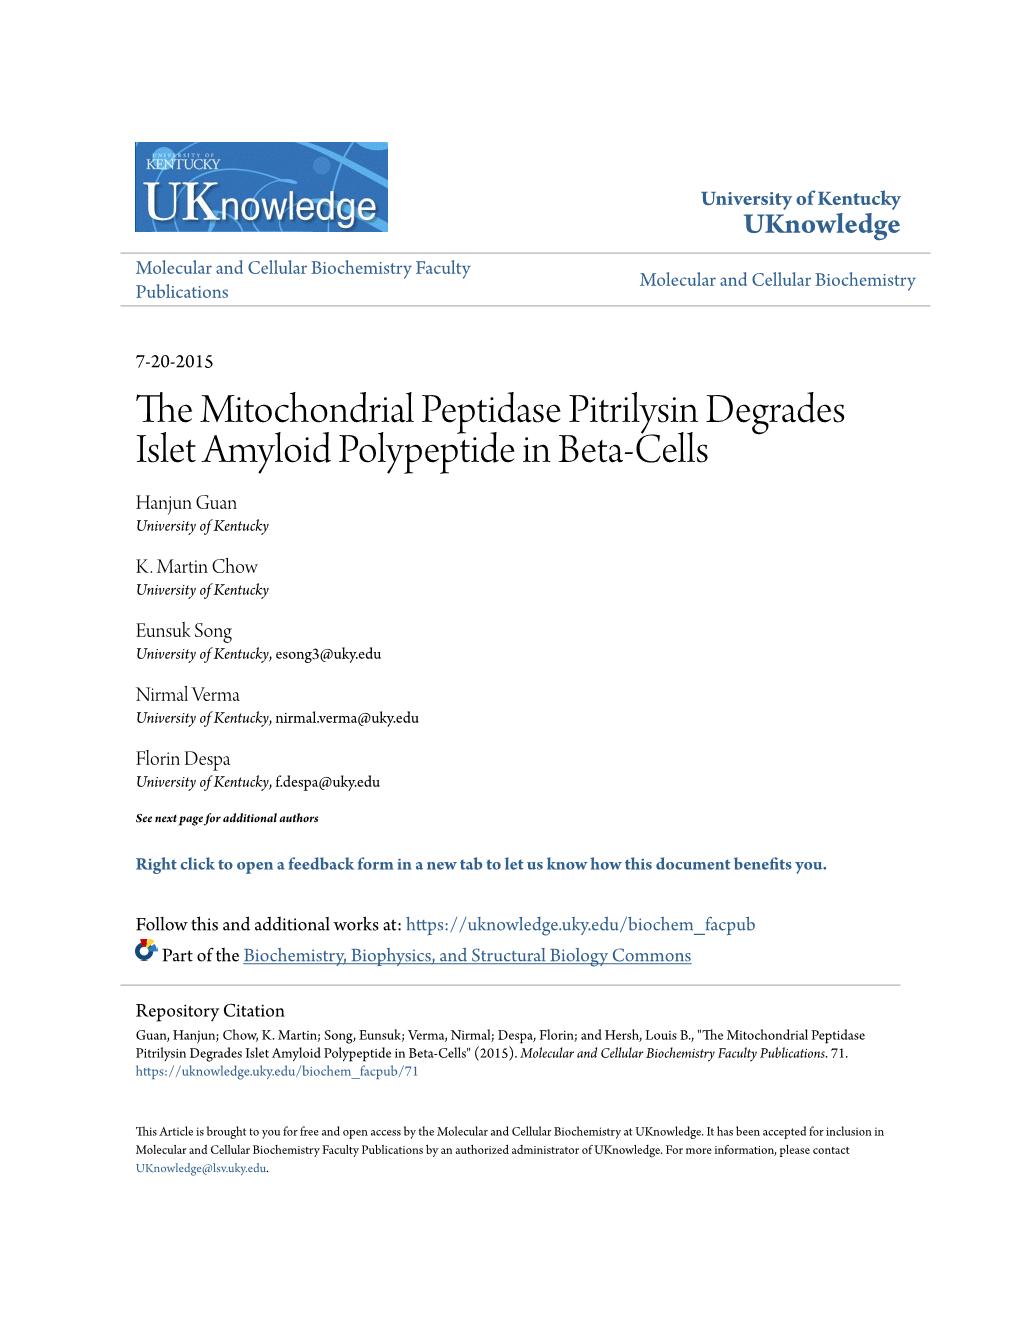 The Mitochondrial Peptidase Pitrilysin Degrades Islet Amyloid Polypeptide in Beta-Cells